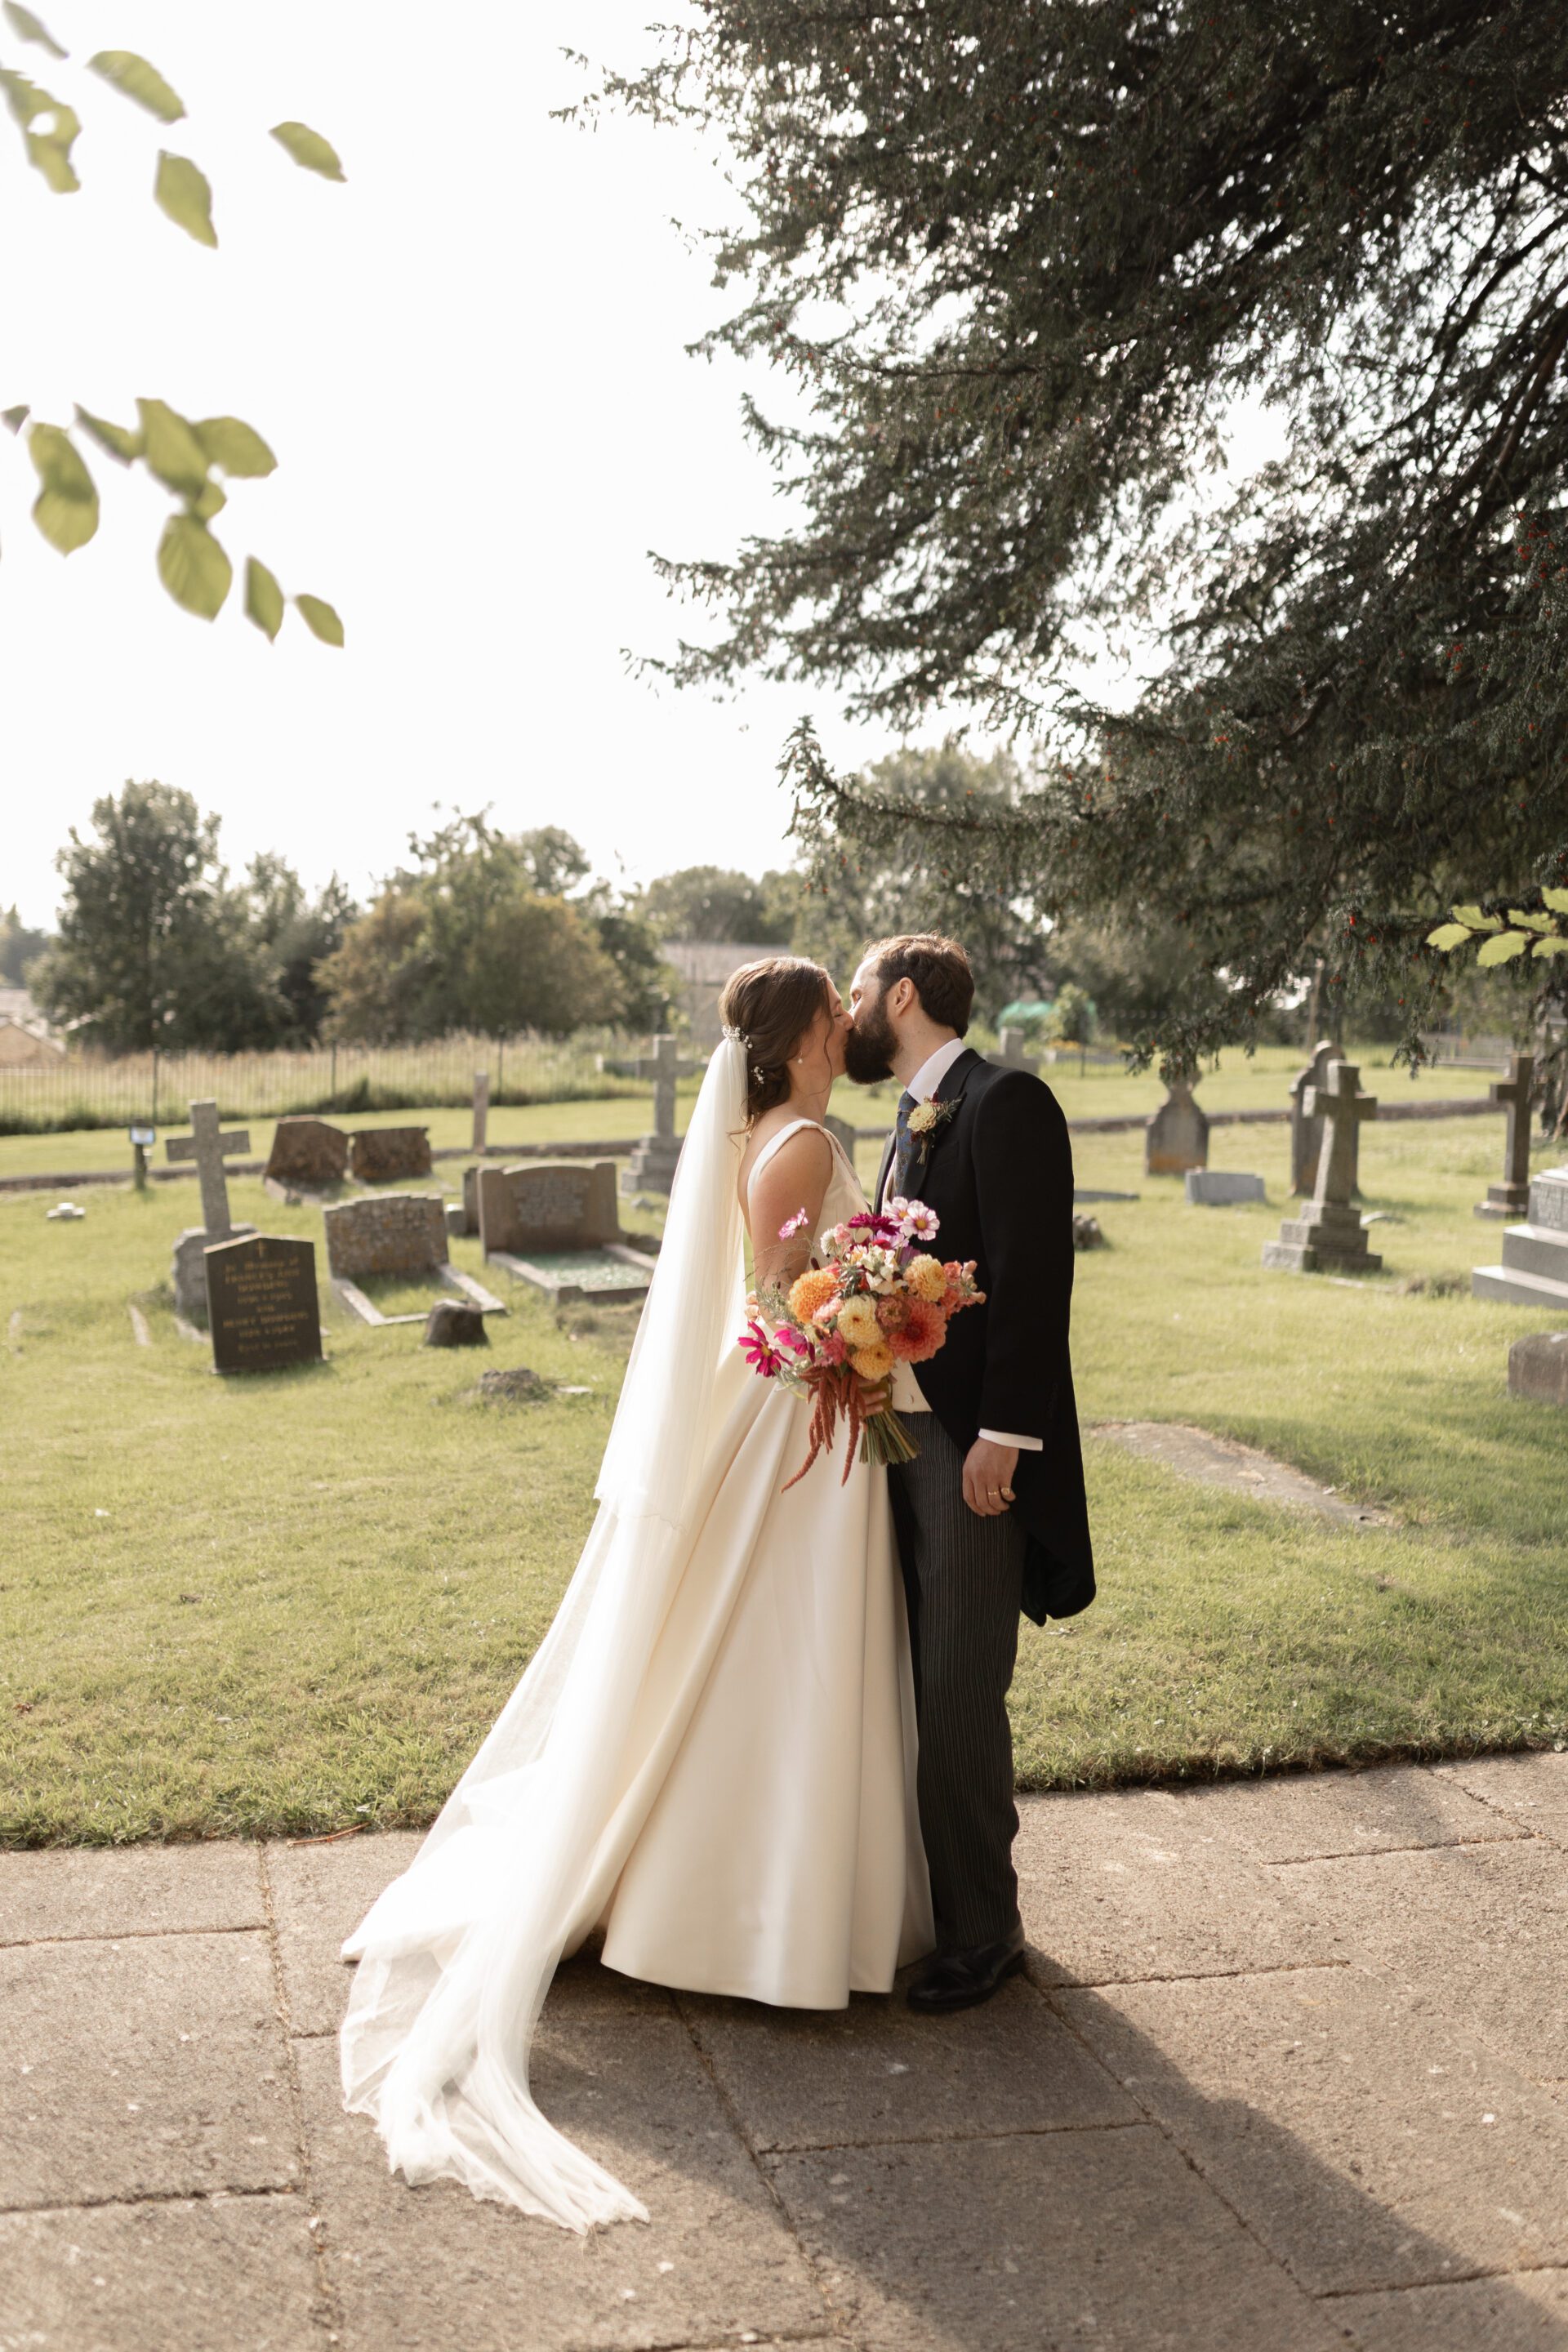 The bride and groom share a kiss after their Somerset church wedding ceremony